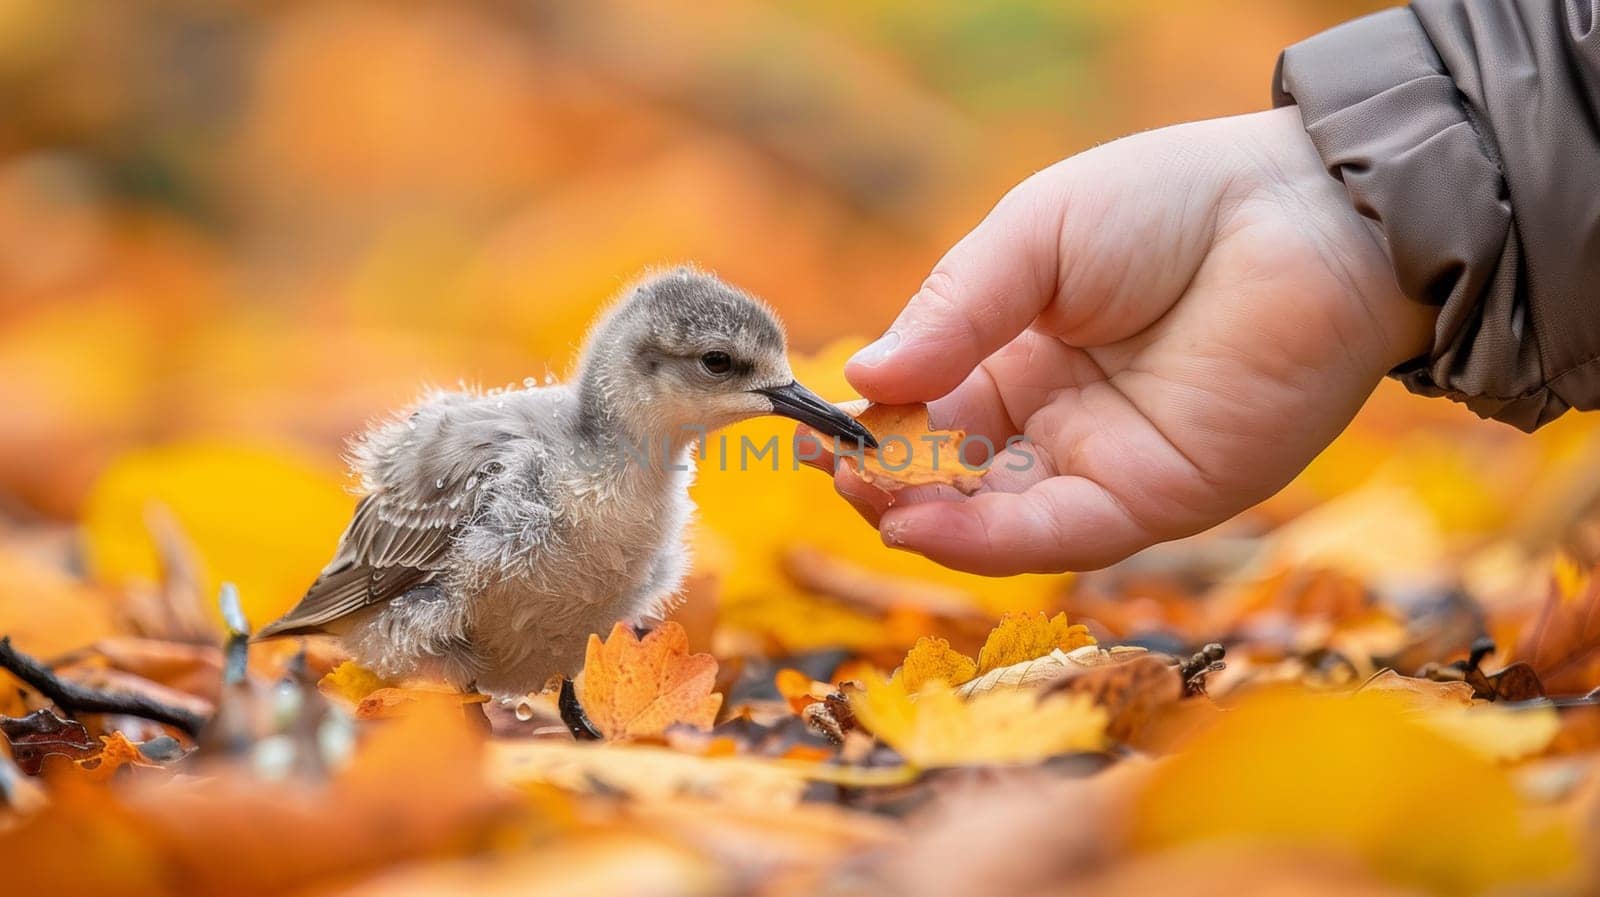 A small bird eating leaves from a hand of someone